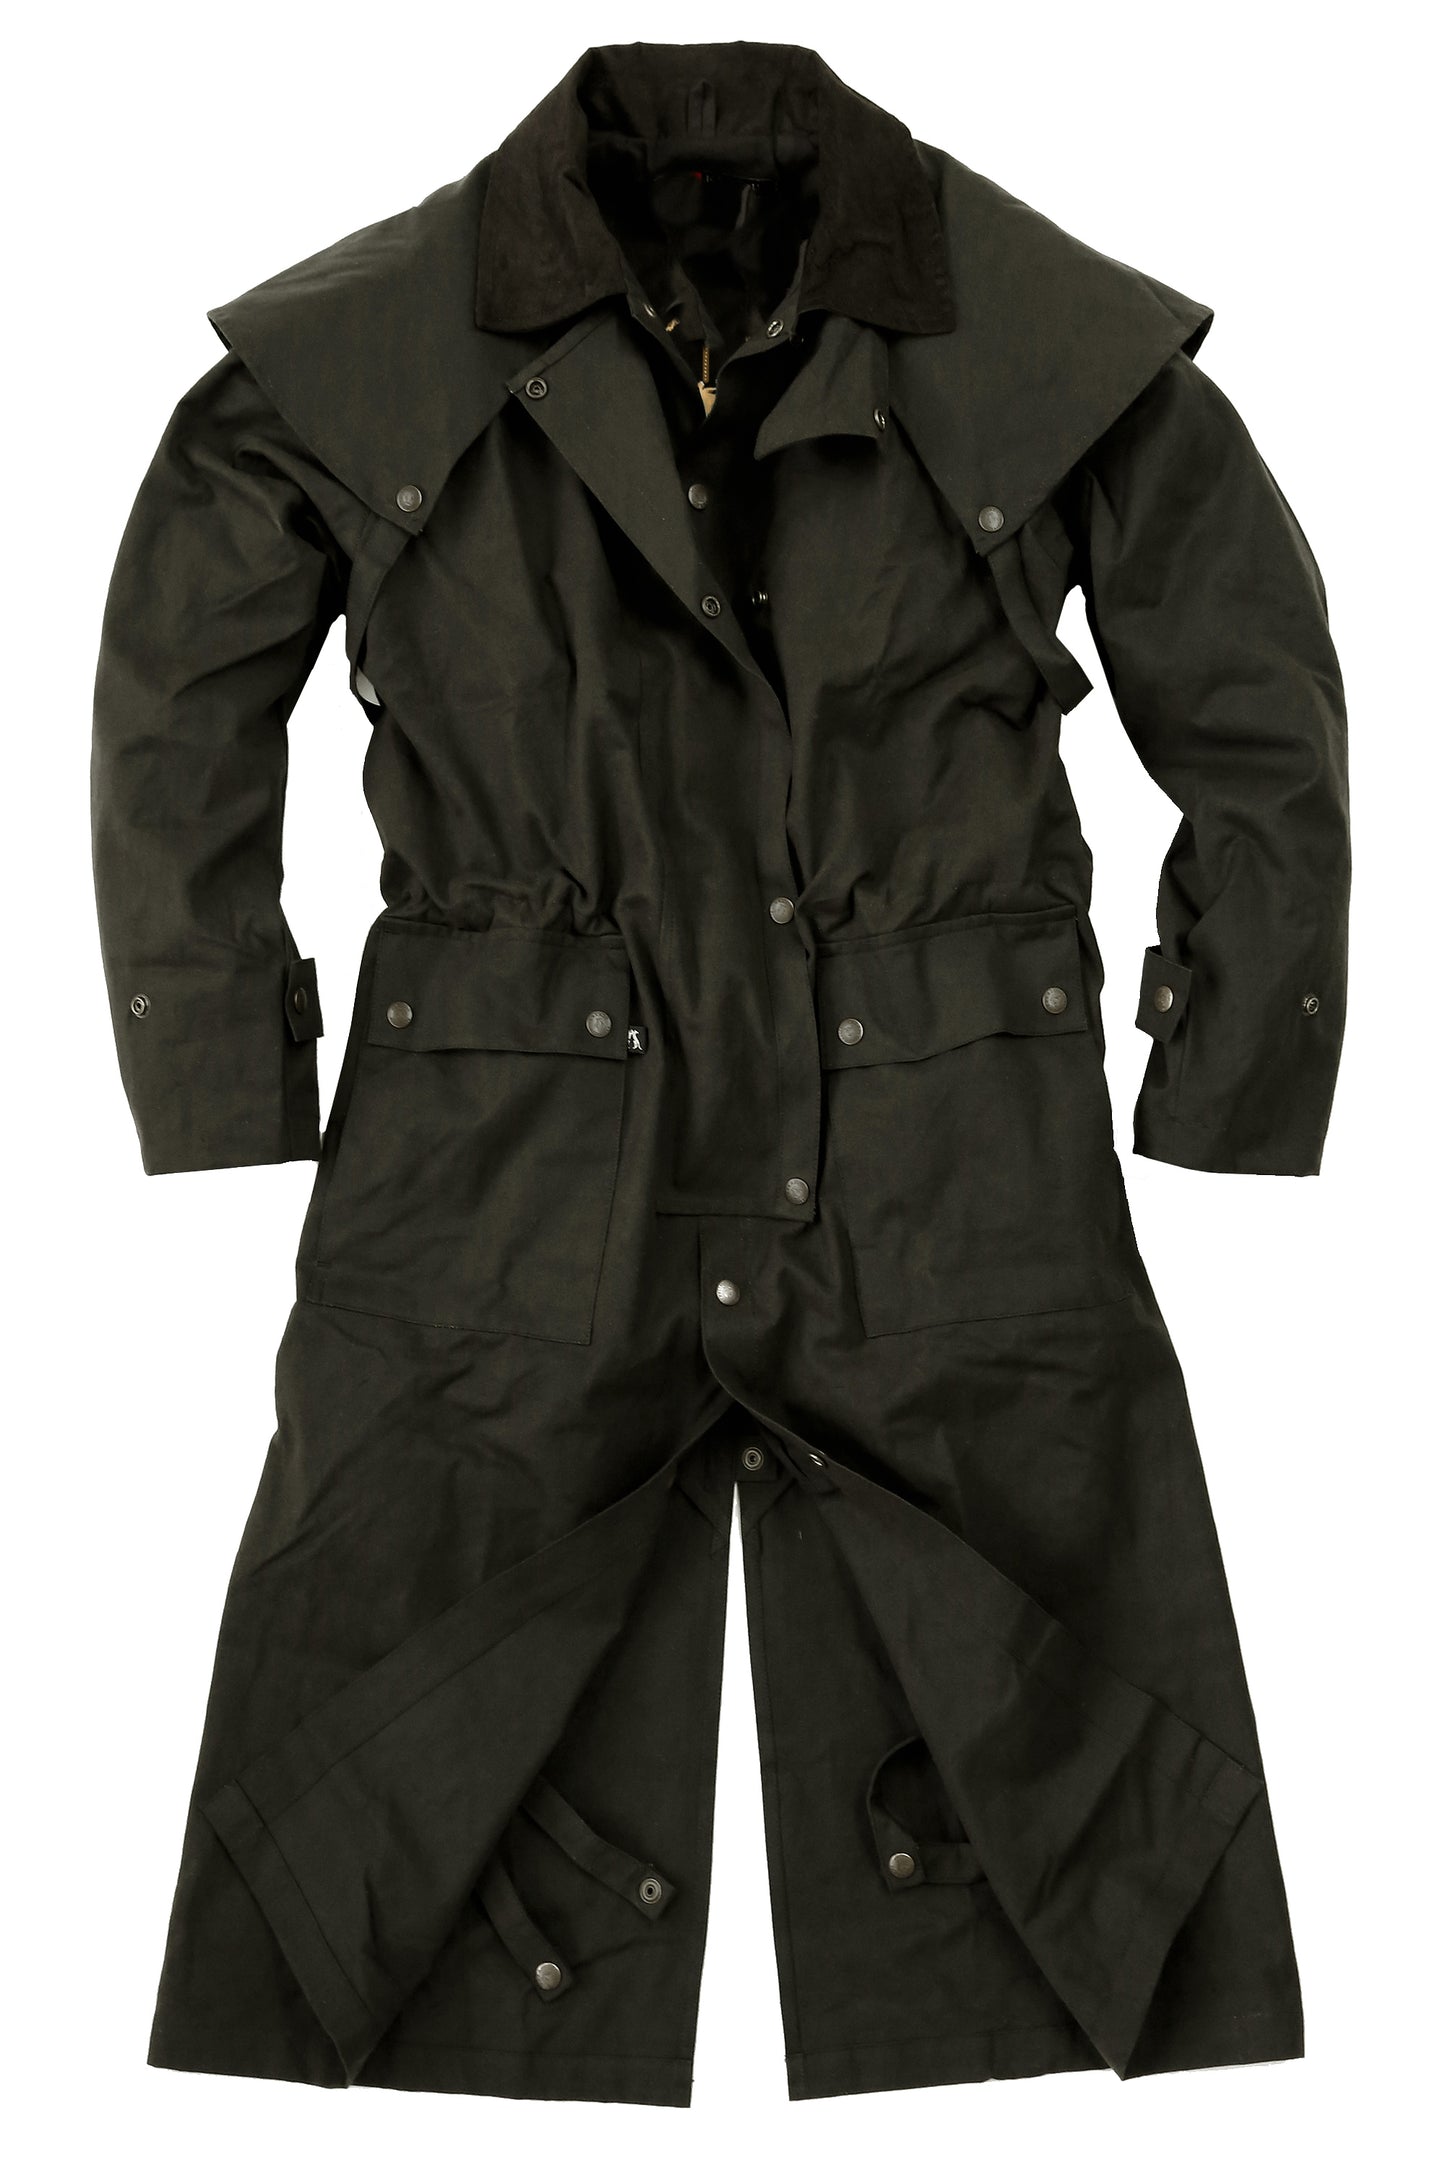 Workhorse Drovers Coat in black with a zipped in Fleecy Liner